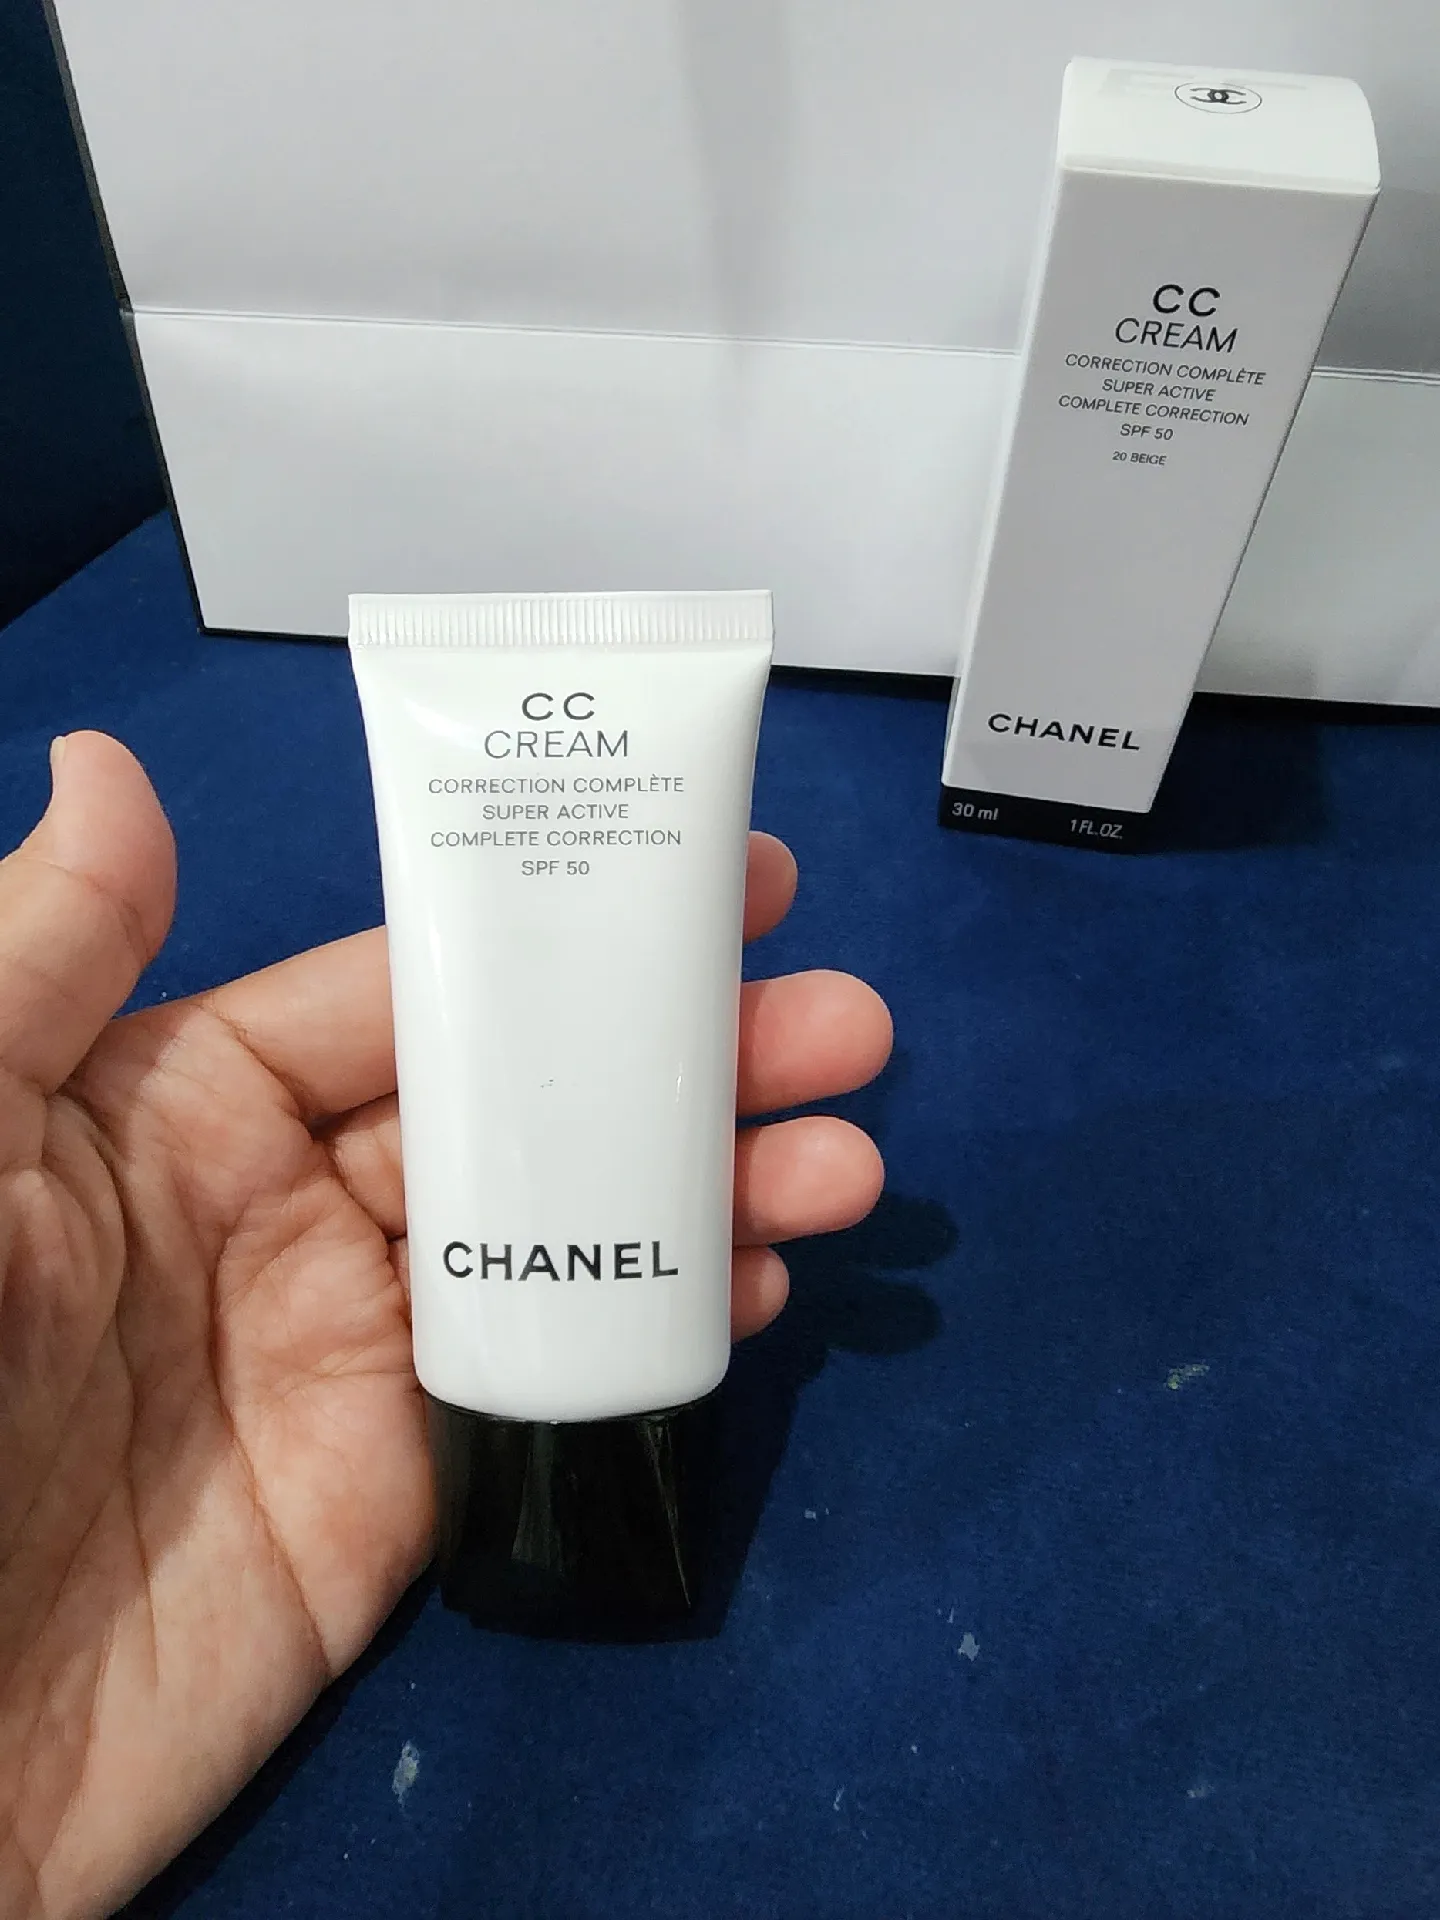 CC chanel, Gallery posted by Jamilyjam Dmg